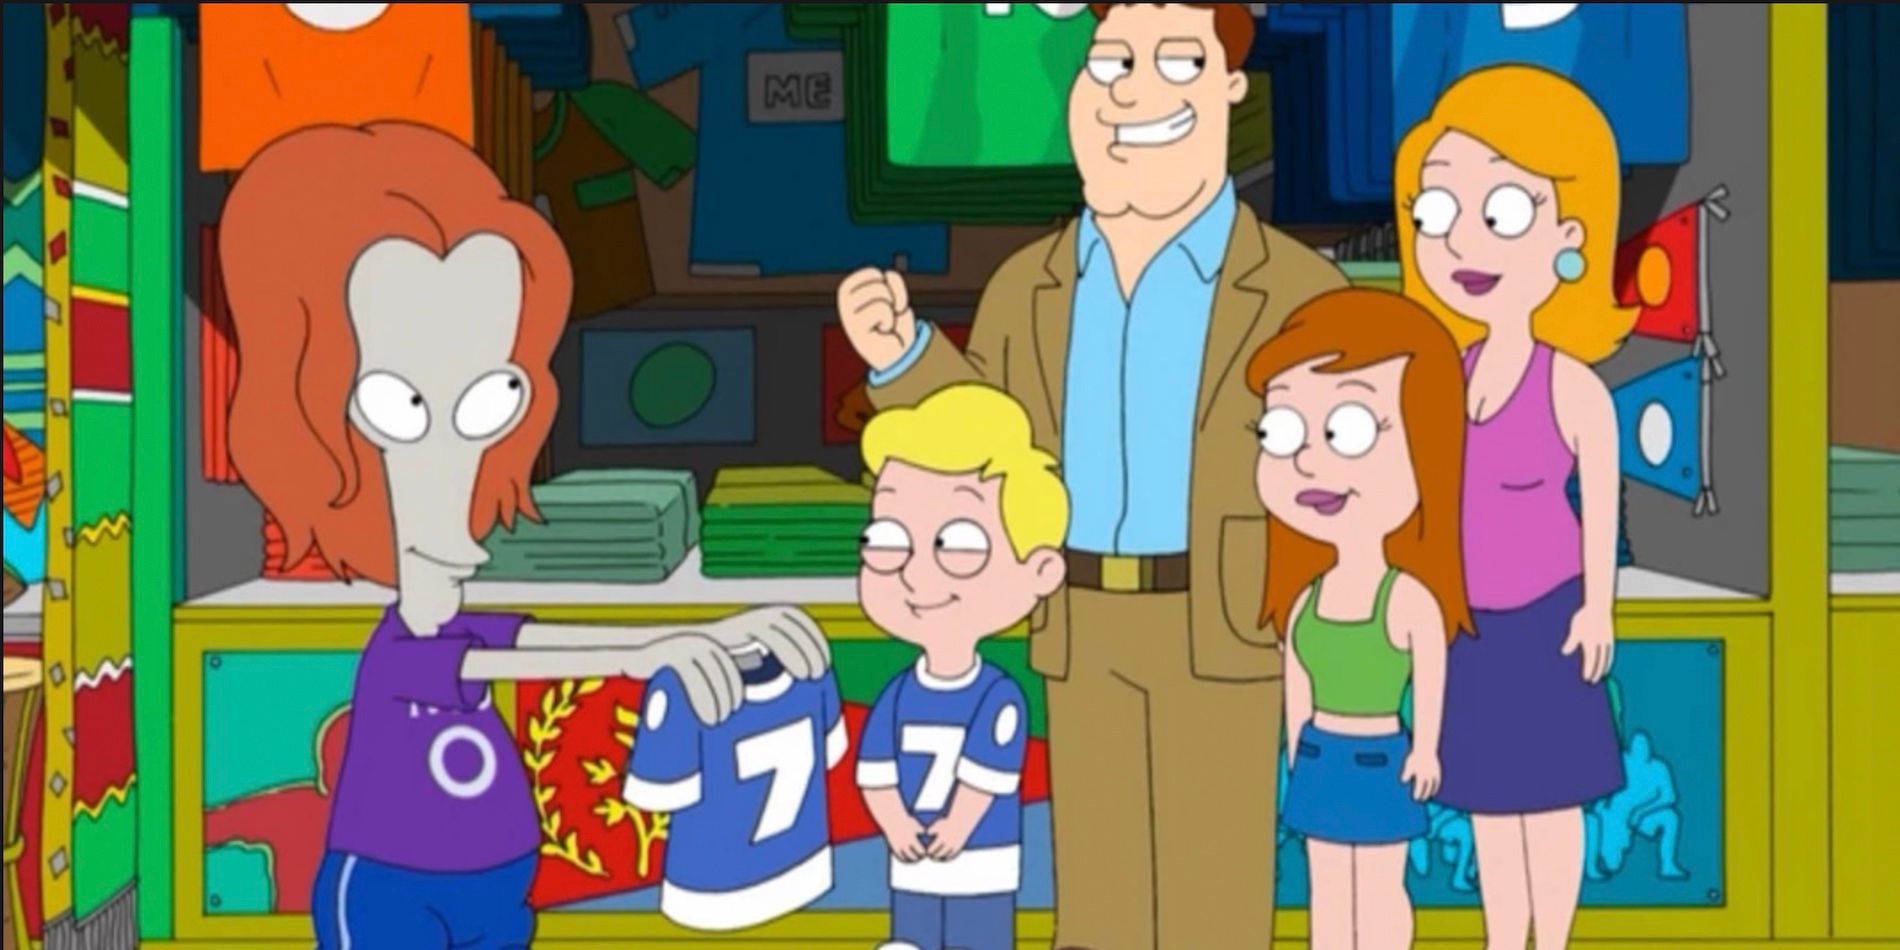 Roger with his "other" family in "Family Affair" episode of American Dad